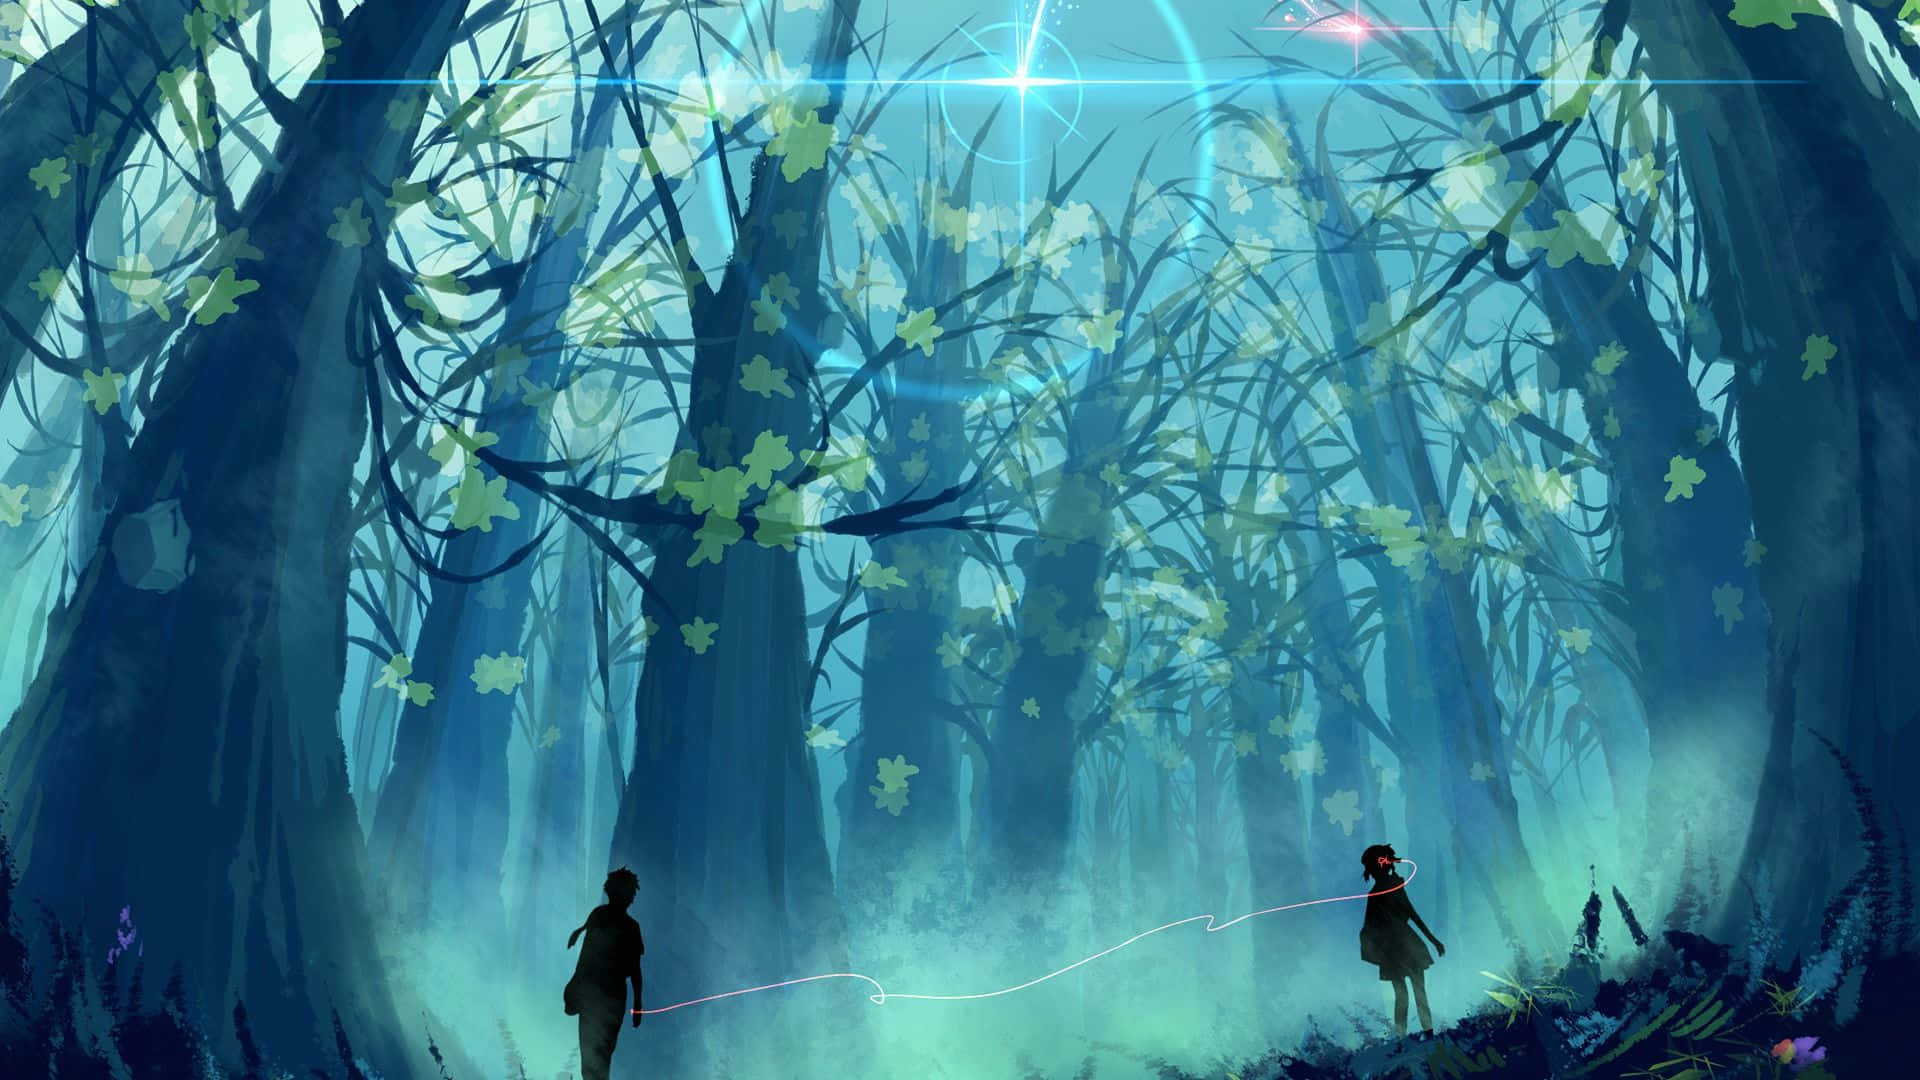 Explore a Hidden World of Magic in the Anime Forest